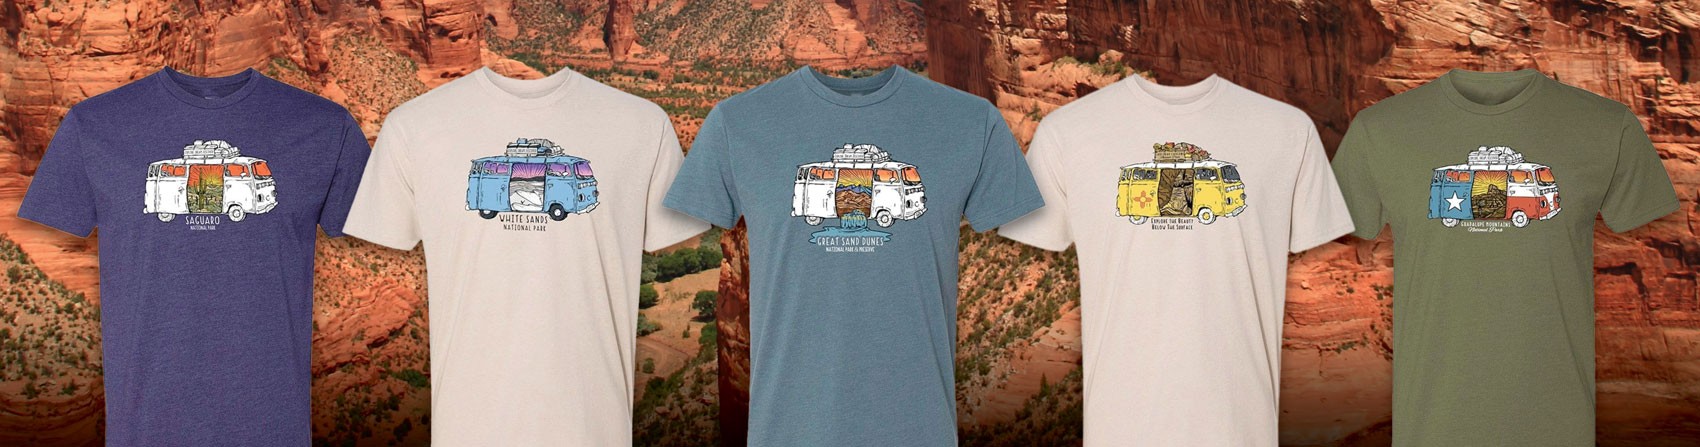 National Park Van Tour T-Shirts on Canyon Background